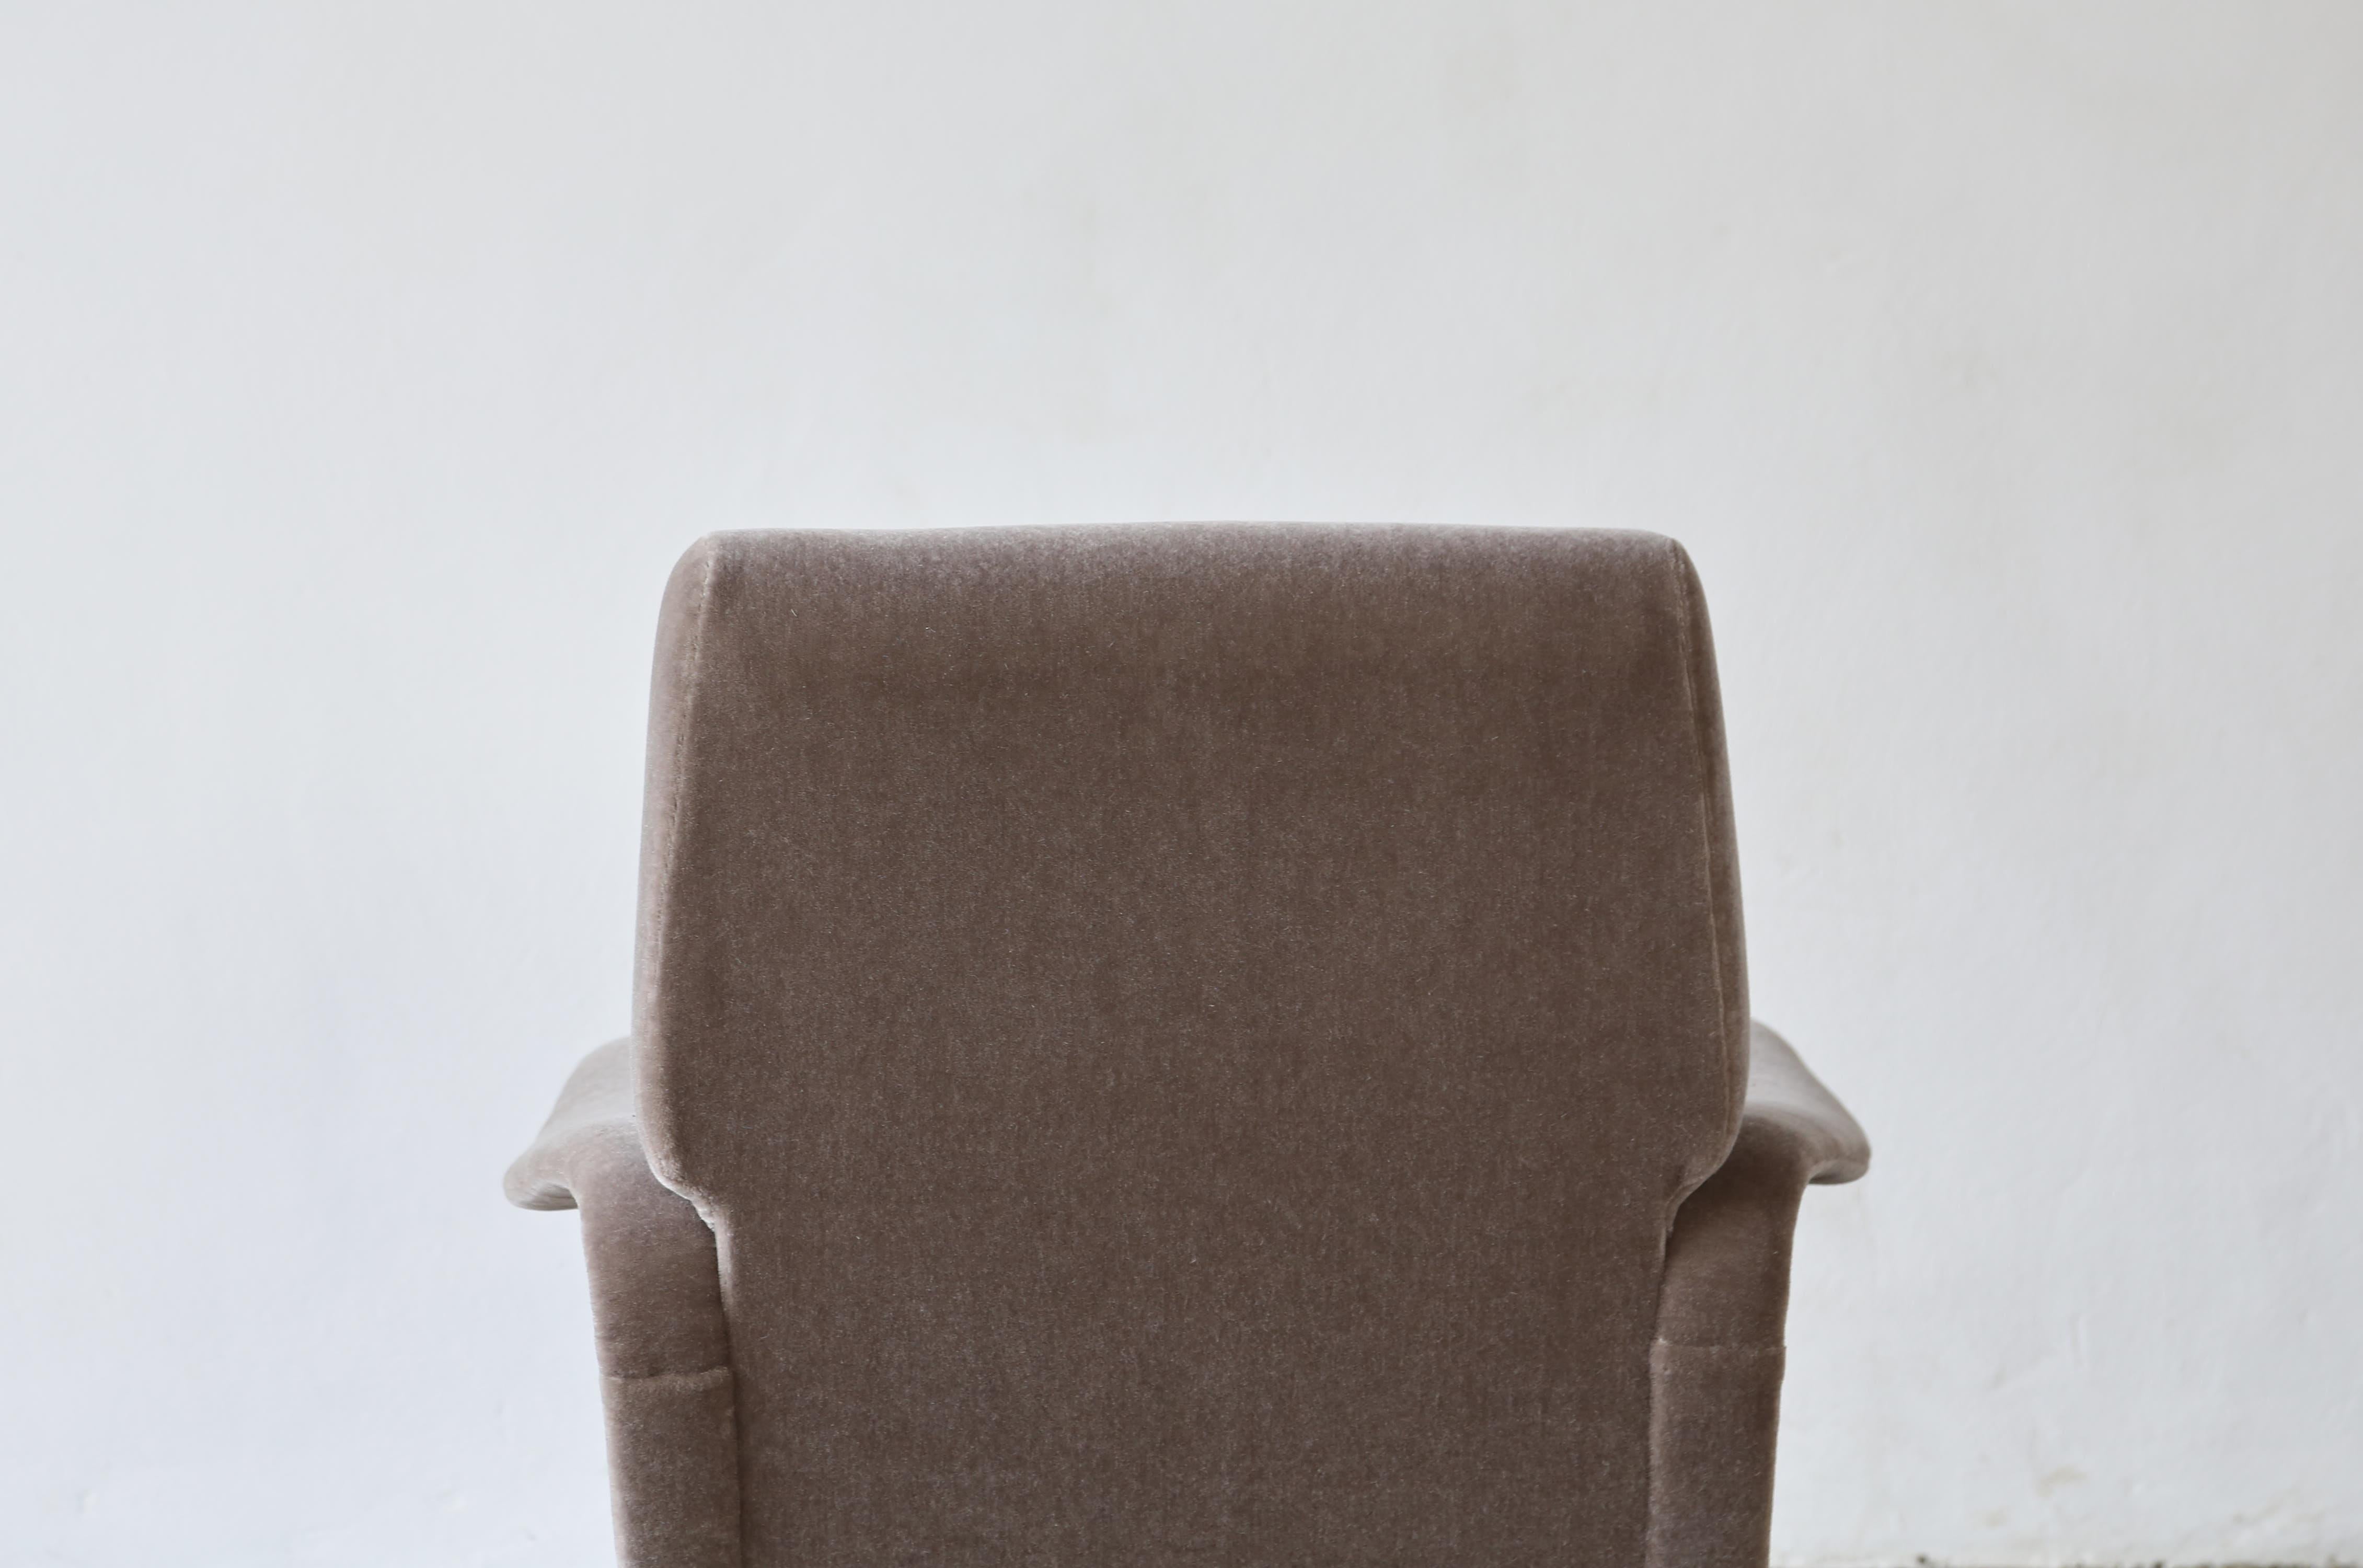 Authentic Marco Zanuso Lady Chair, Arflex, in Pure Mohair, Italy, 1950s For Sale 1